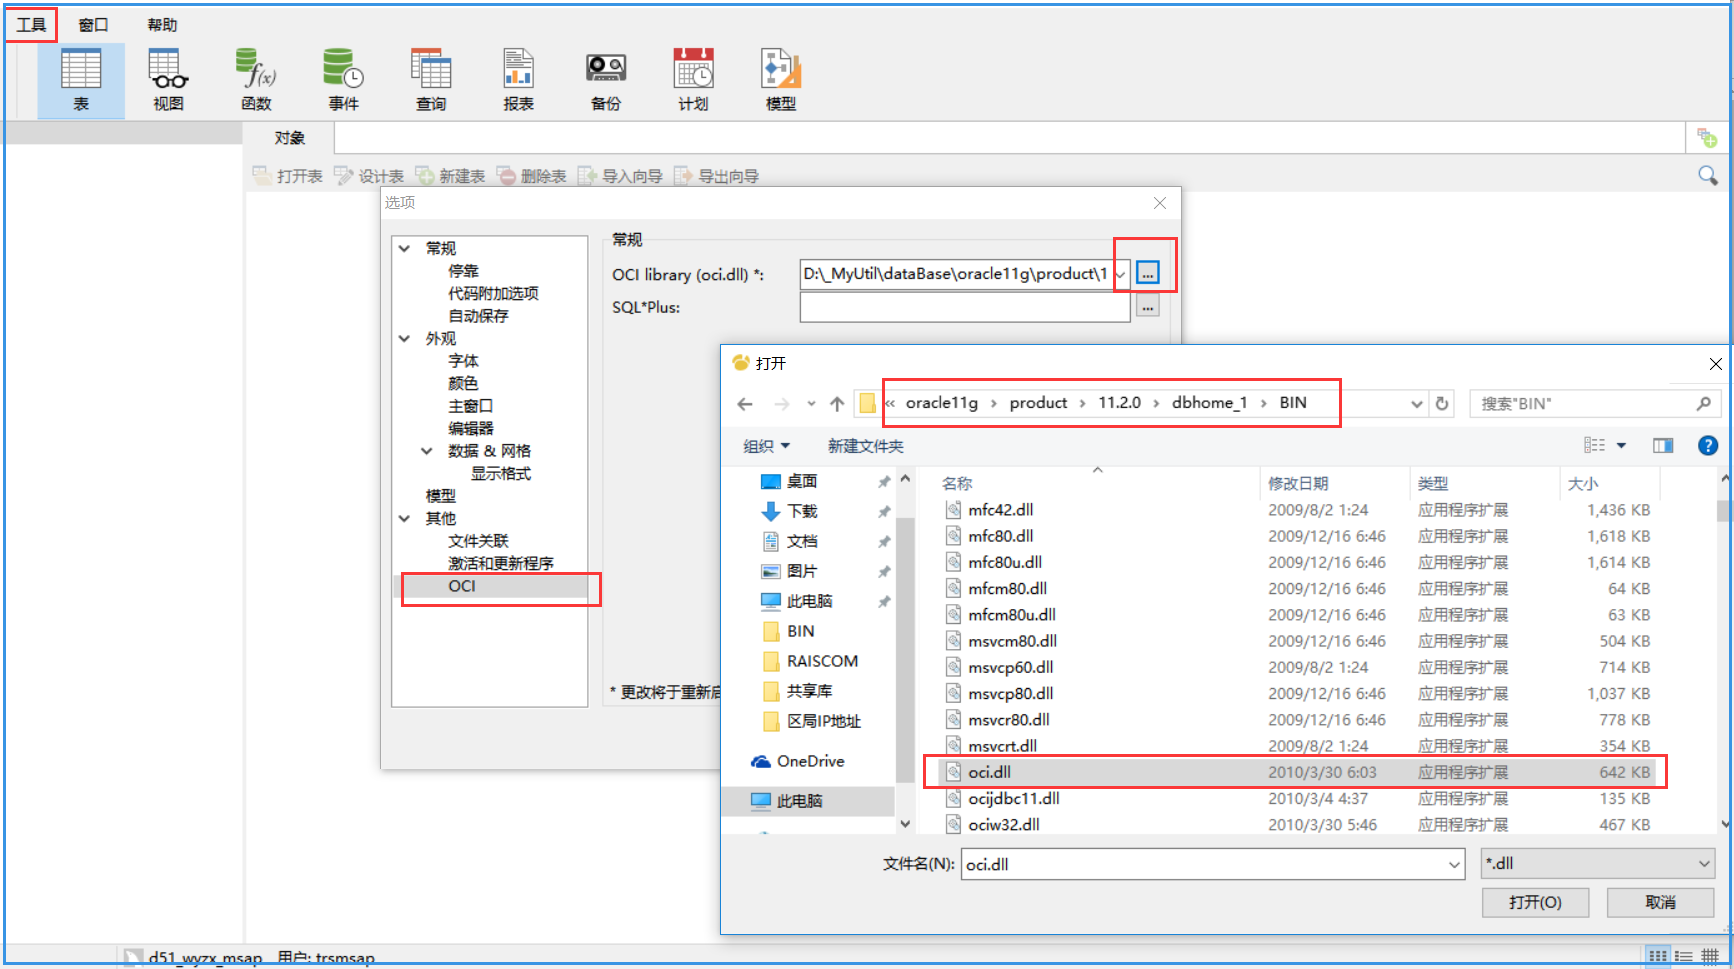 Navicat无法连接Oracle 11g：Cannot load OCI DLL 87/193——解决办法